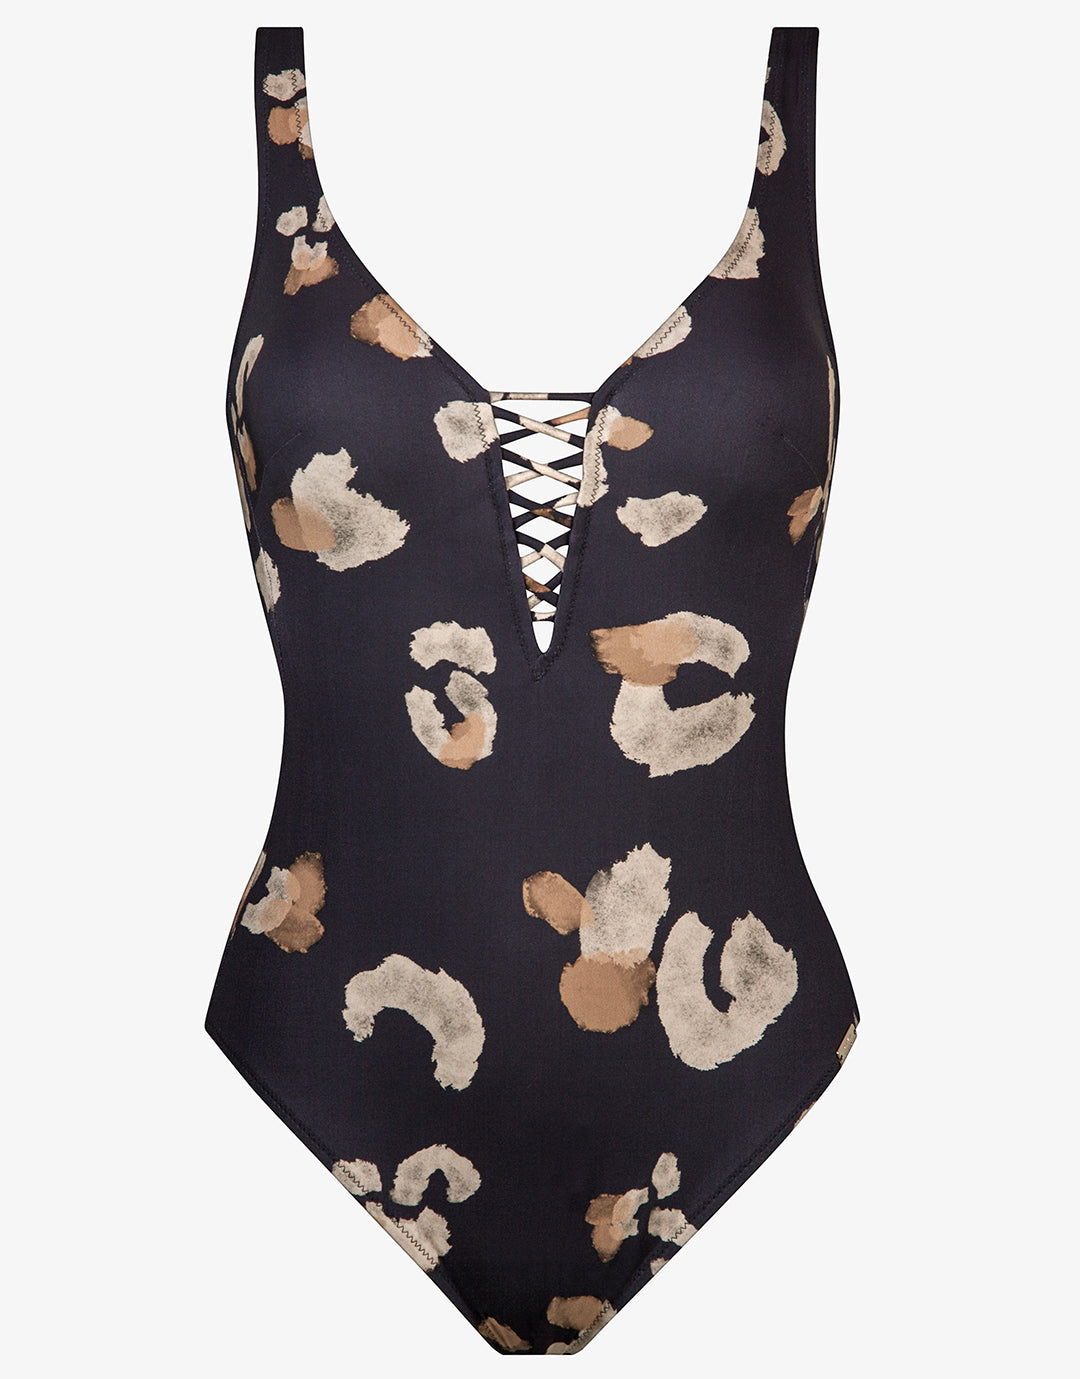 Abstraction Plunge Swimsuit - Black and Brown - Simply Beach UK